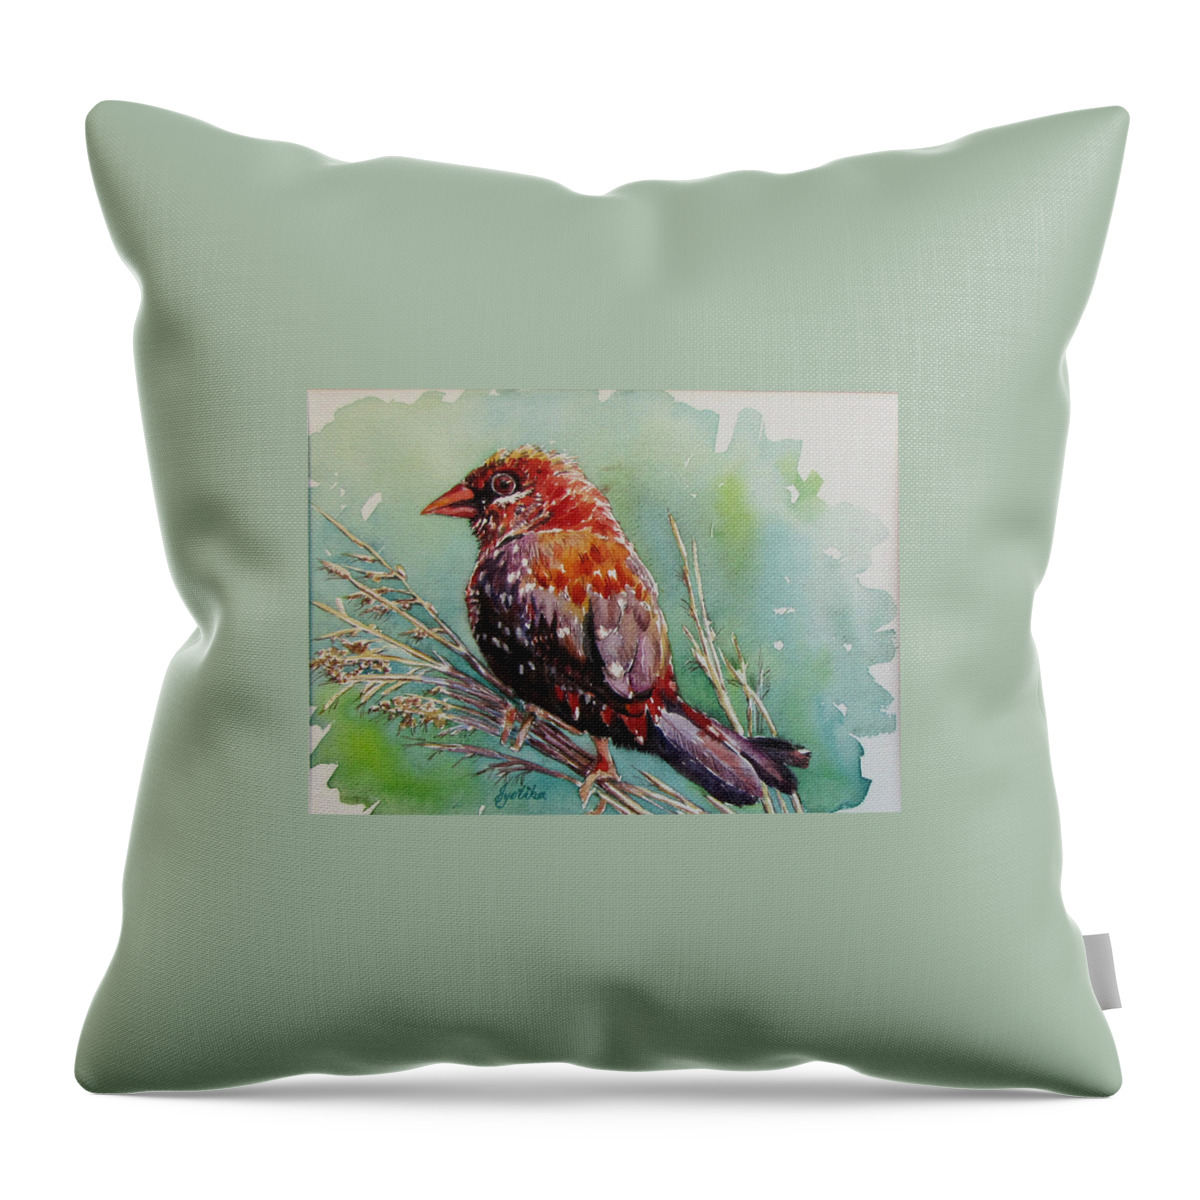 Bird Throw Pillow featuring the painting The Red Bird by Jyotika Shroff